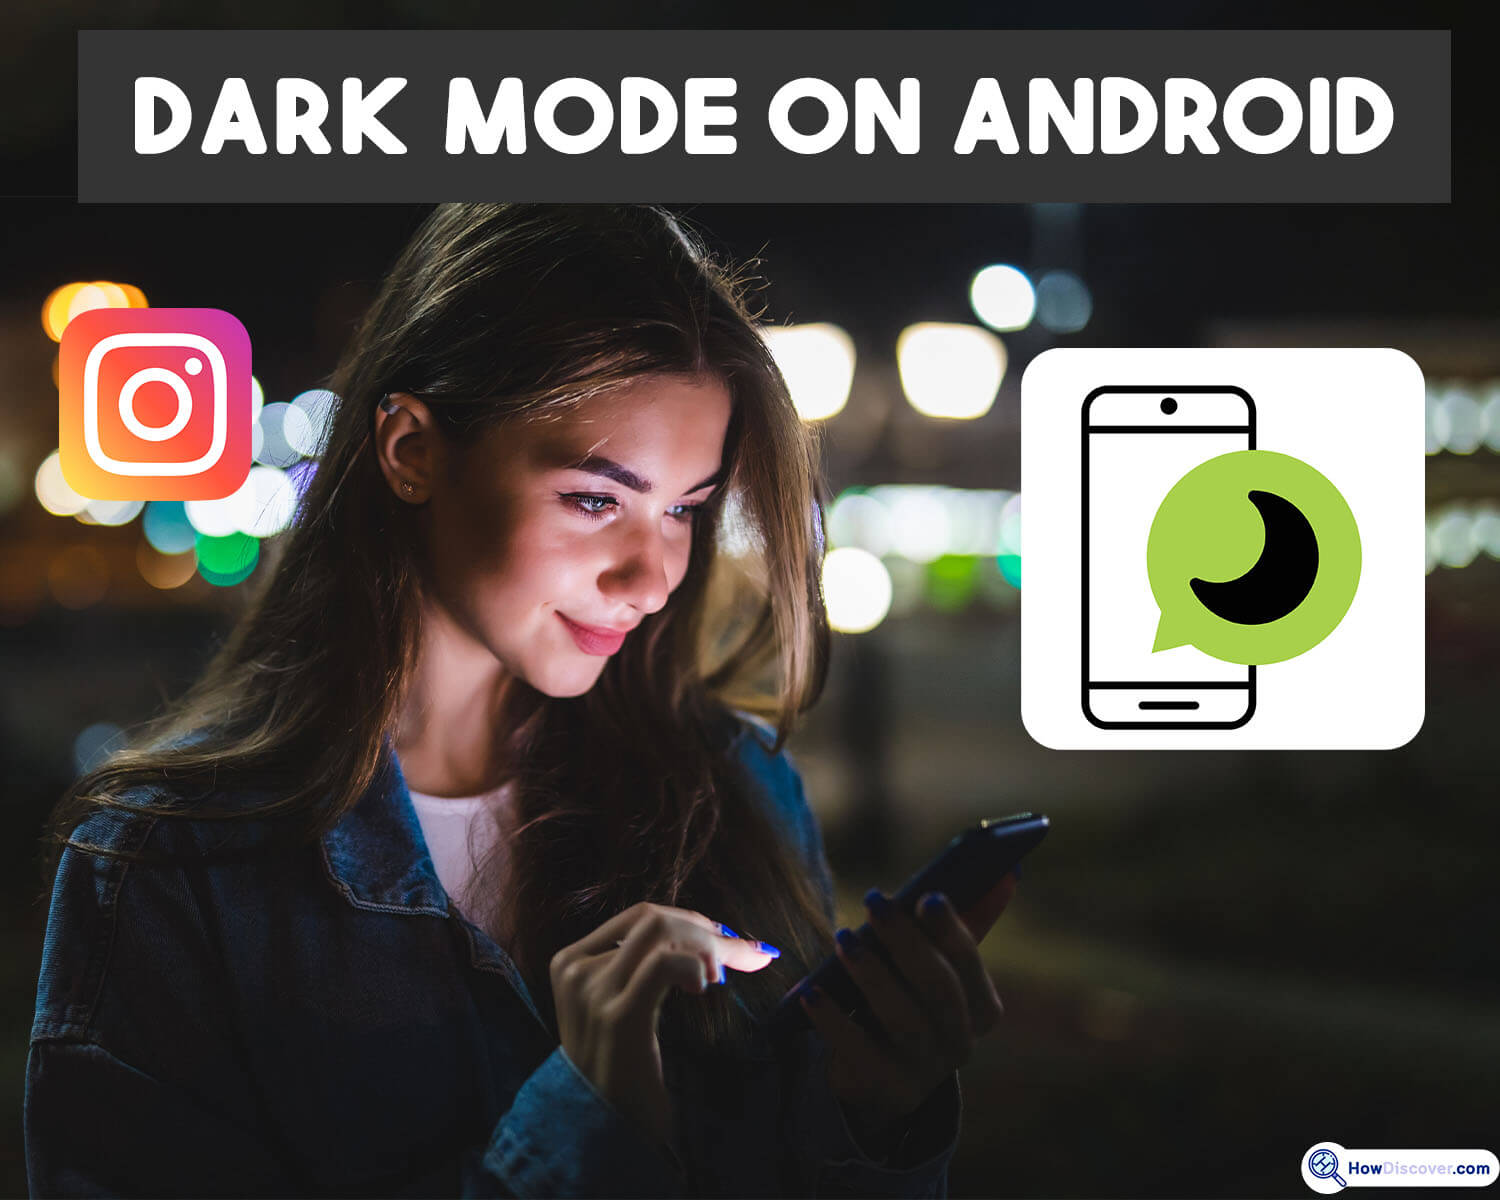 Enabling Dark Mode on Android Devices - How to Make Instagram Dark Mode